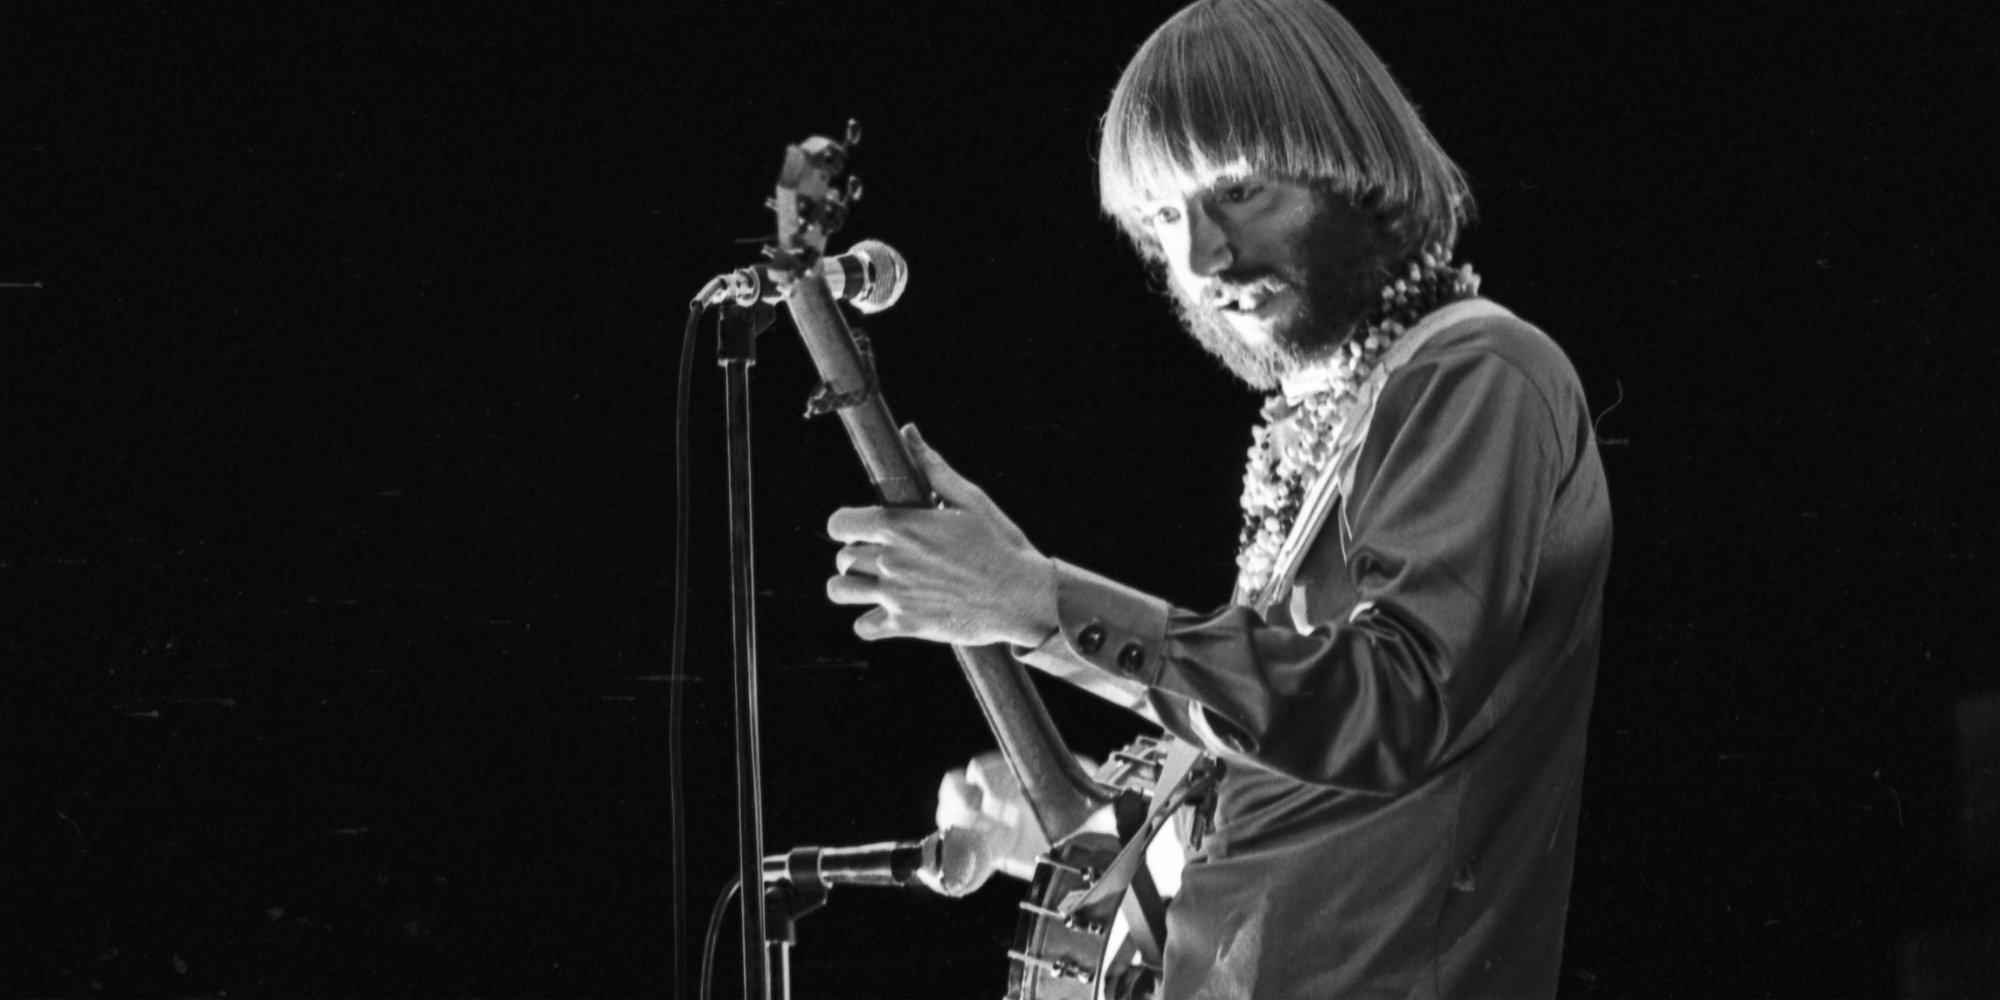 A black and white image of Peter Tork playing guitar.